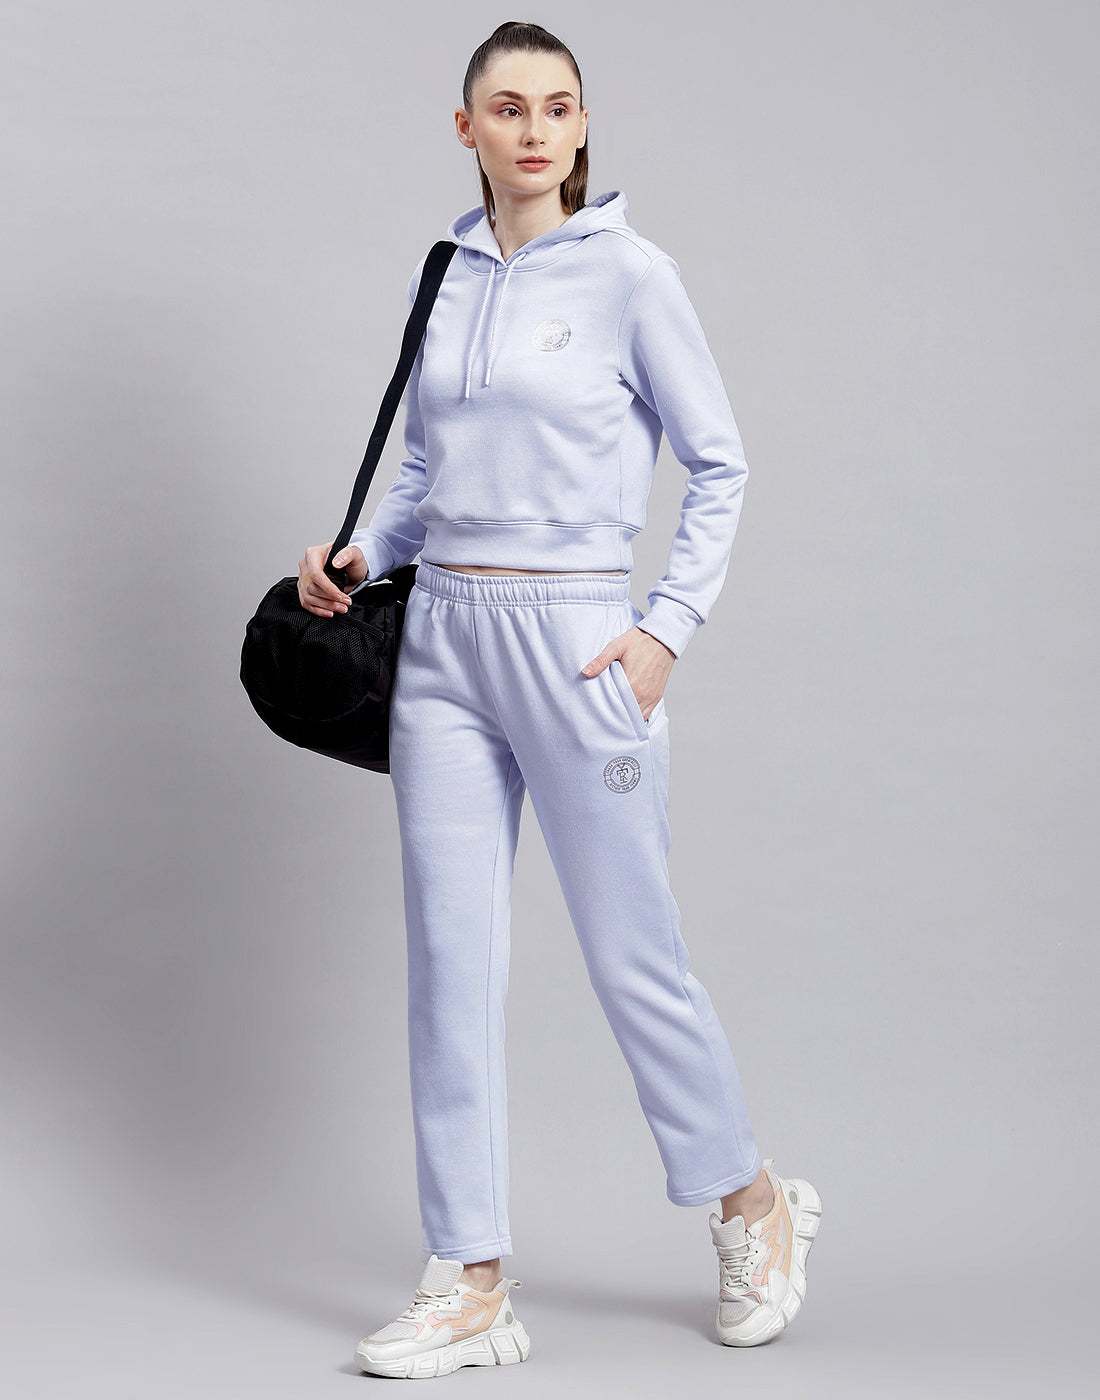 Women's tracksuits and sportswear for ladies: online store Blue